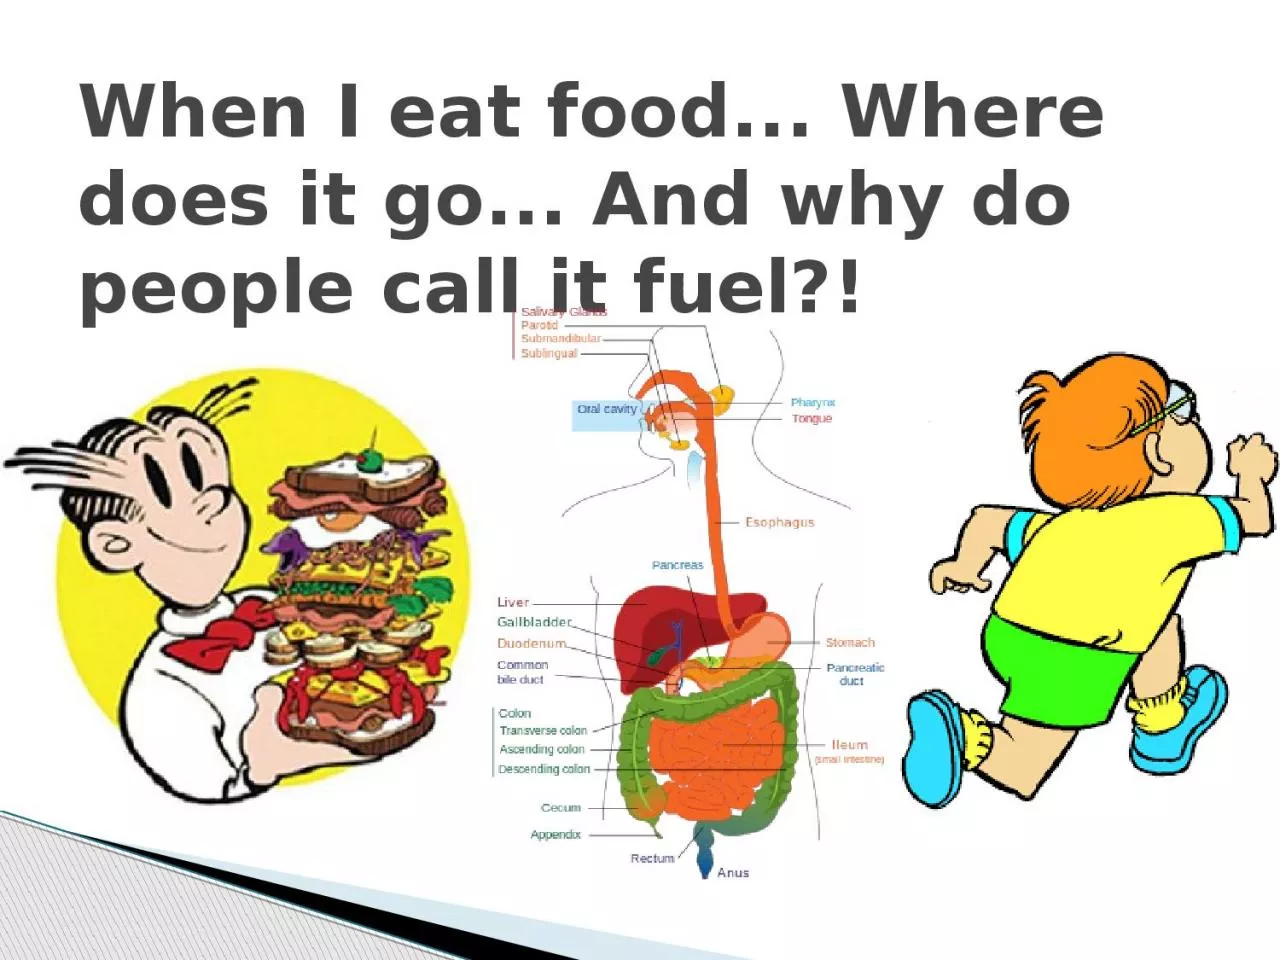 When I eat food... Where does it go... And why do people call it fuel?!